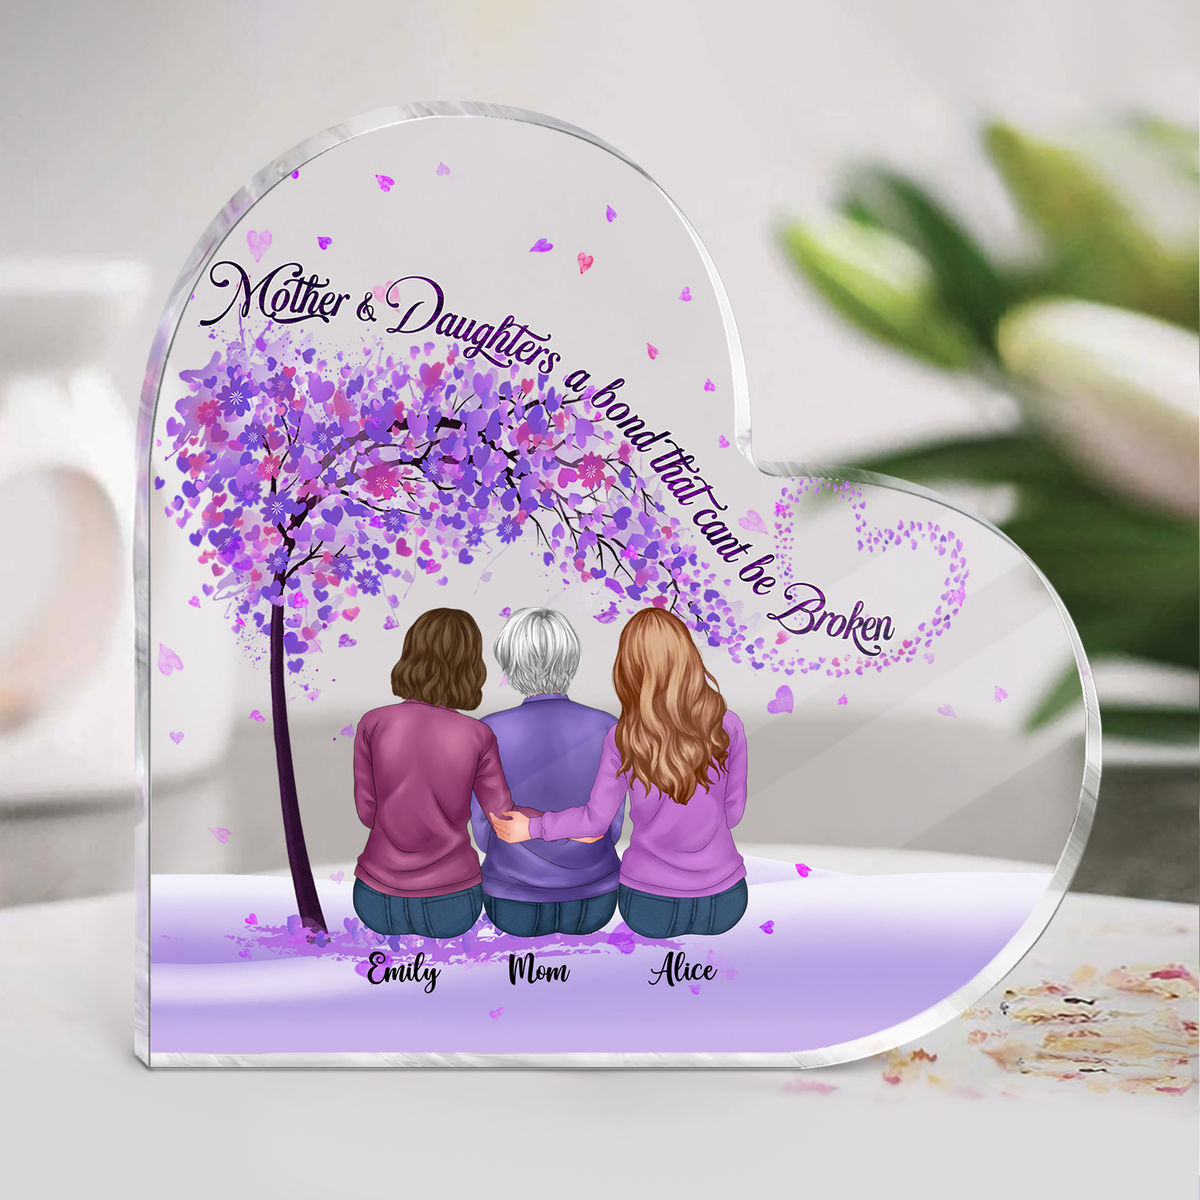 Mother and Daughters a bond that can't be broken - Xmas, Mother's Day, Birthday Gifts